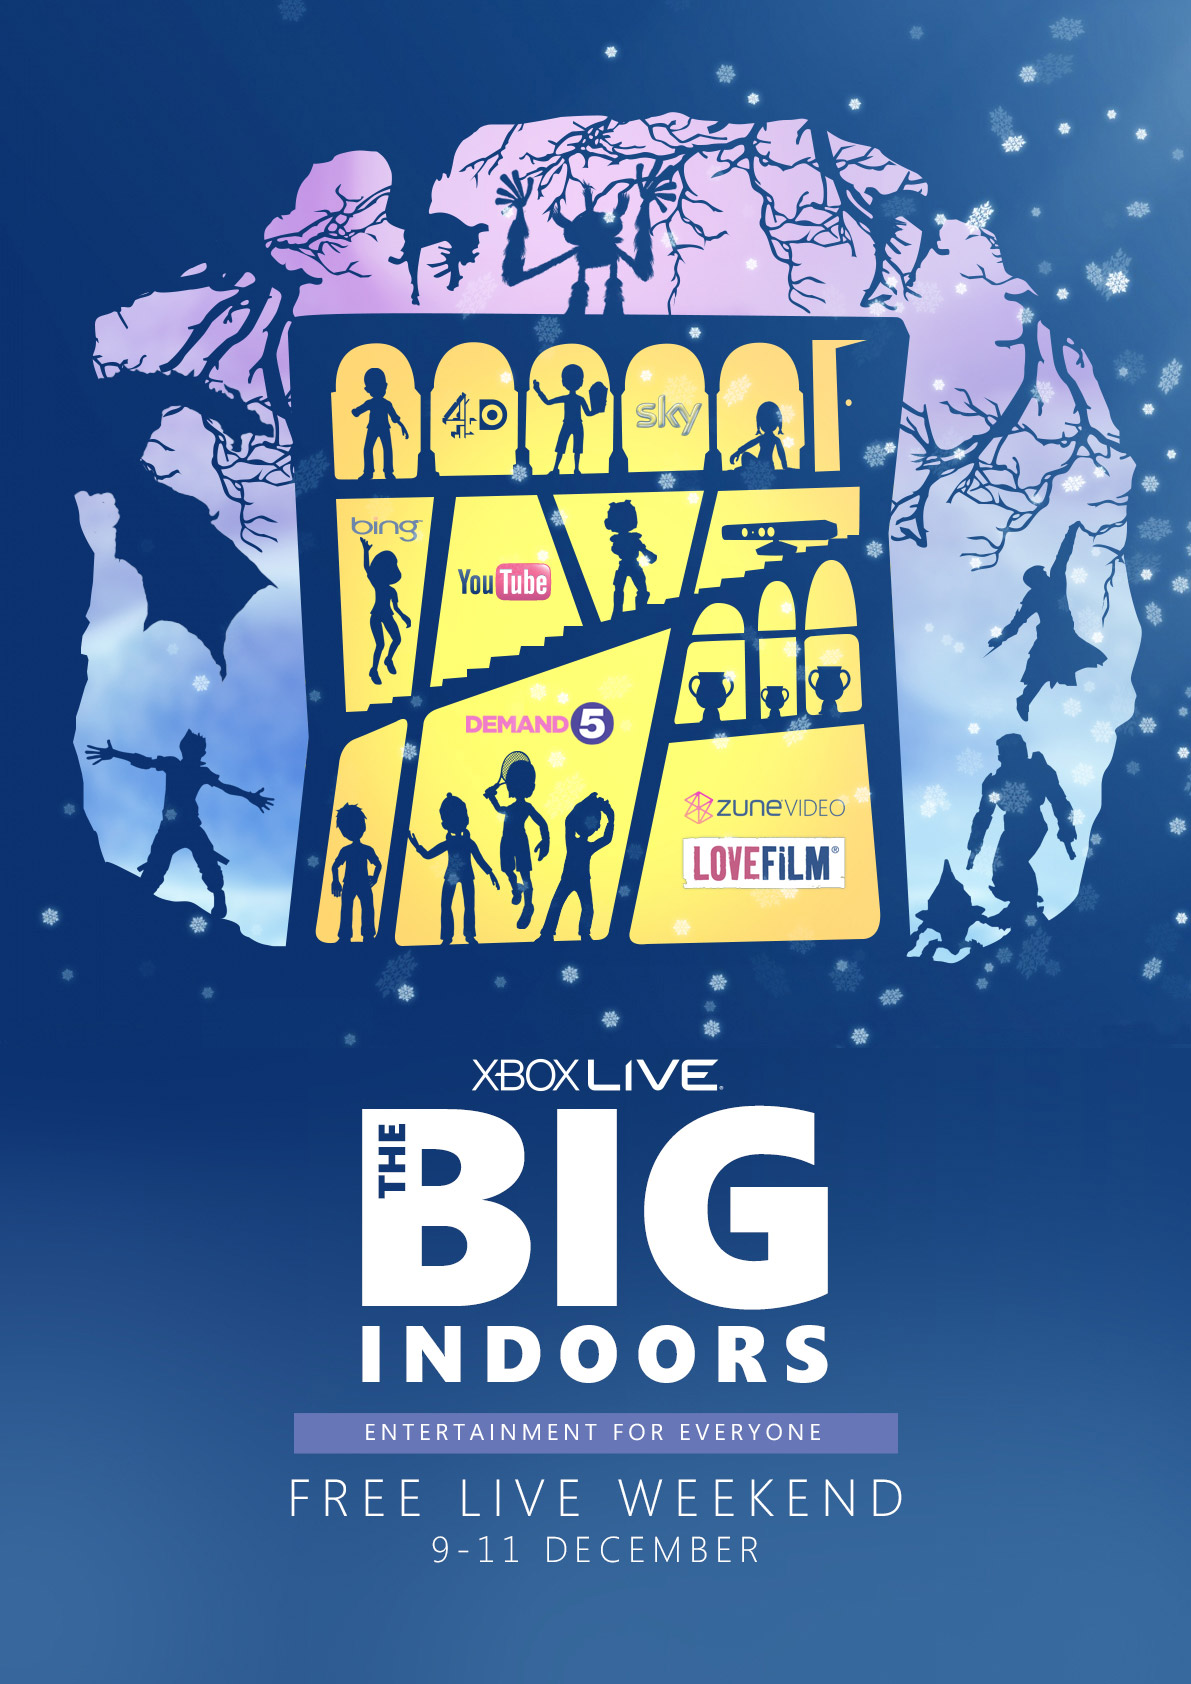 Campaign poster for Xbox's The Big Indoors